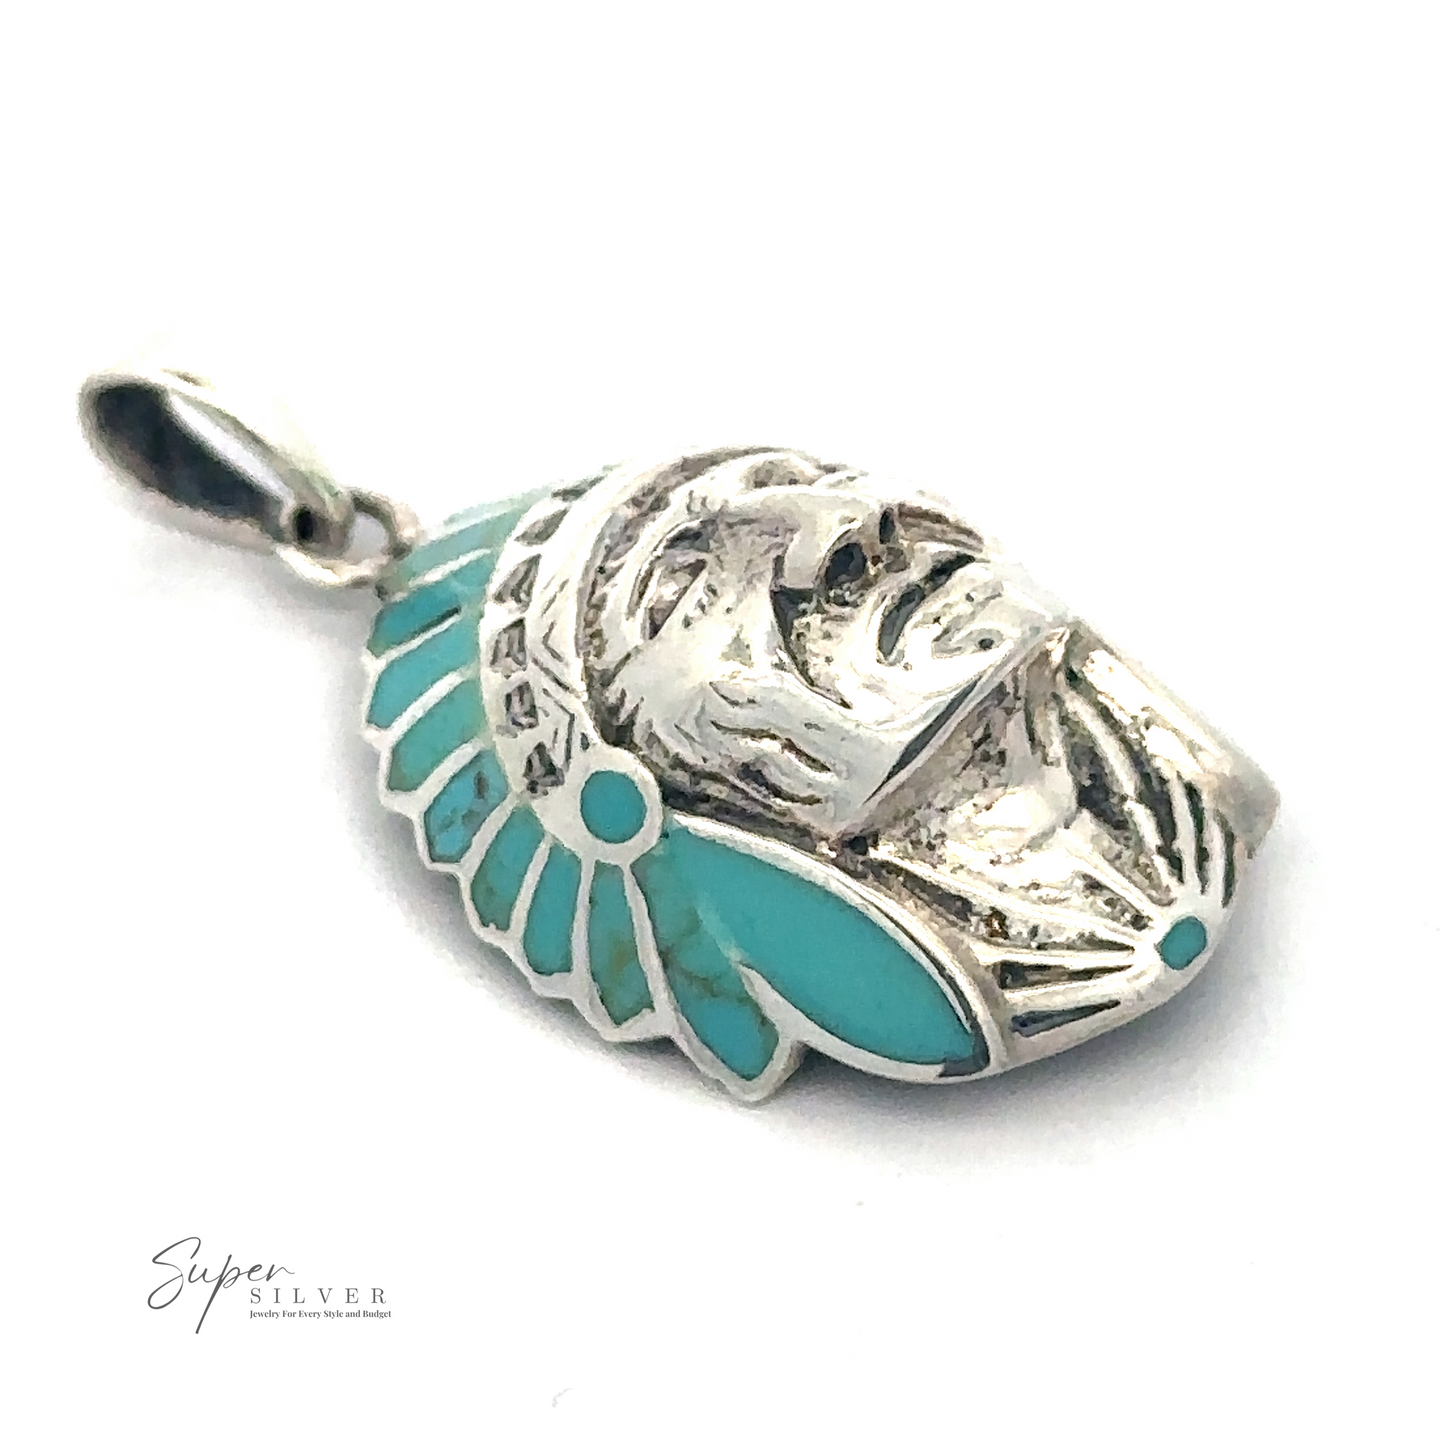 
                  
                    A Turquoise Chief Head Pendant shaped like a face with a turquoise headdress, placed on a white background. The words "Super Silver" appear in the lower-left corner.
                  
                